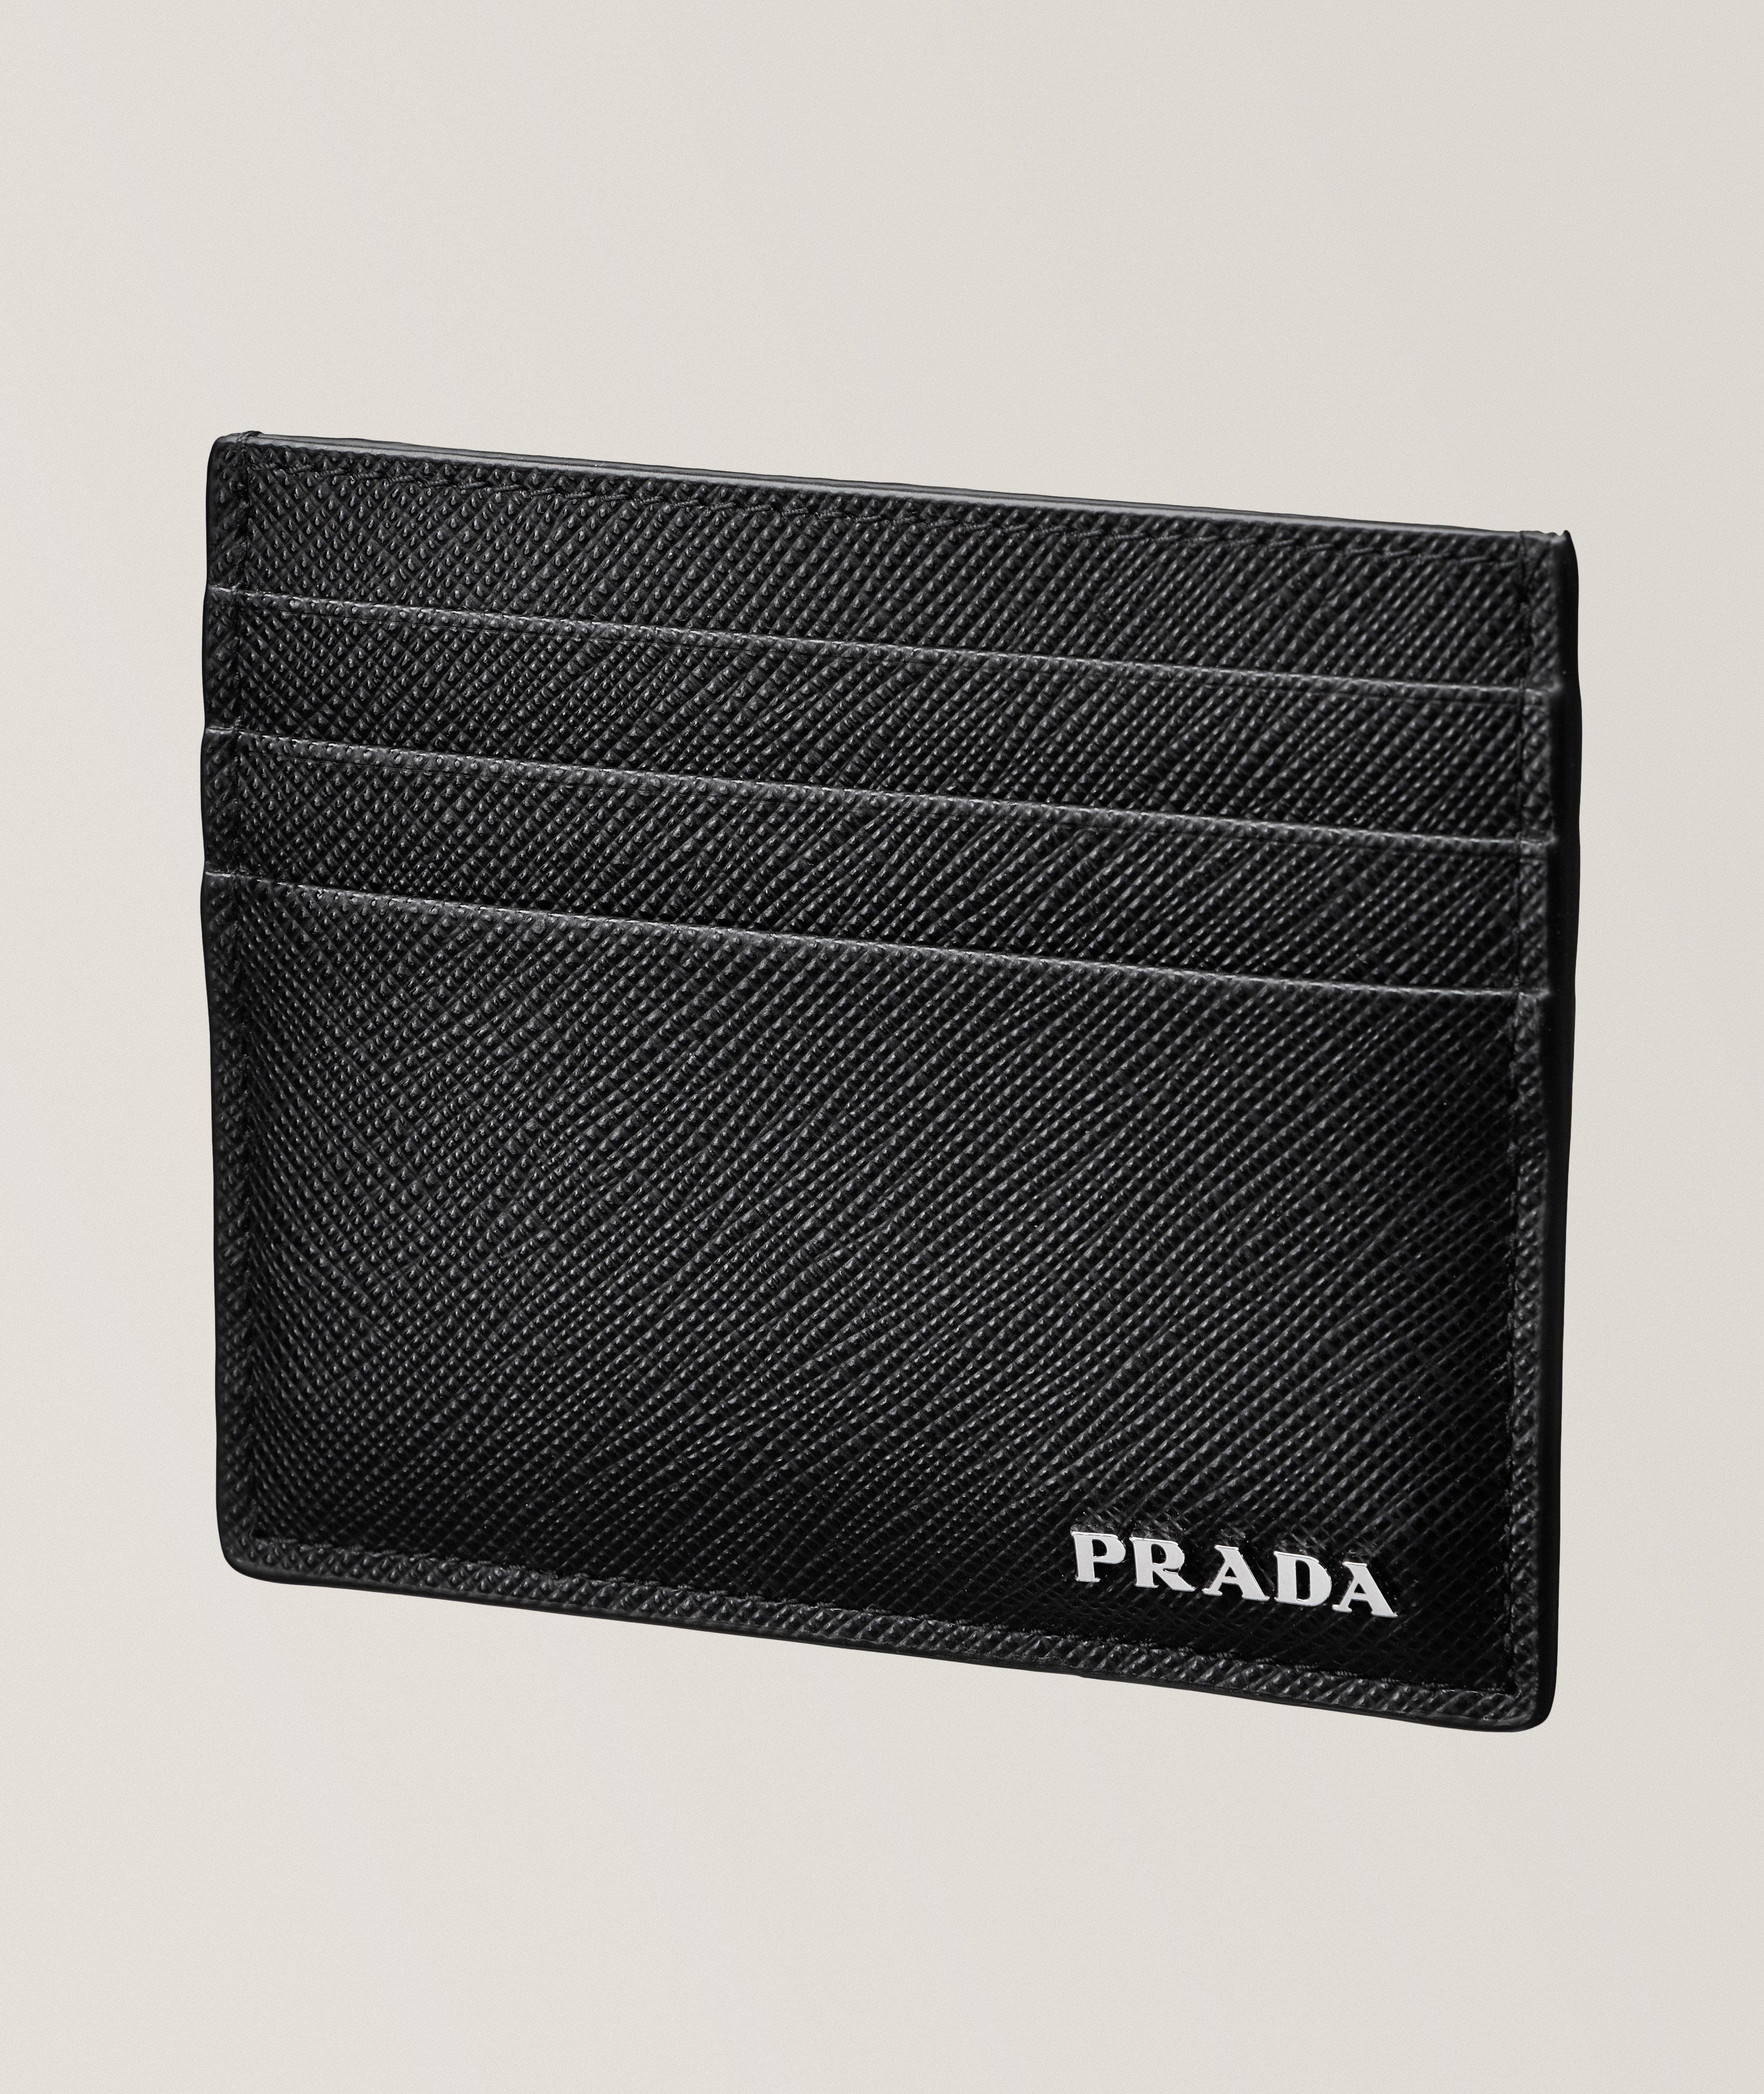 Textured Saffiano Leather Cardholder